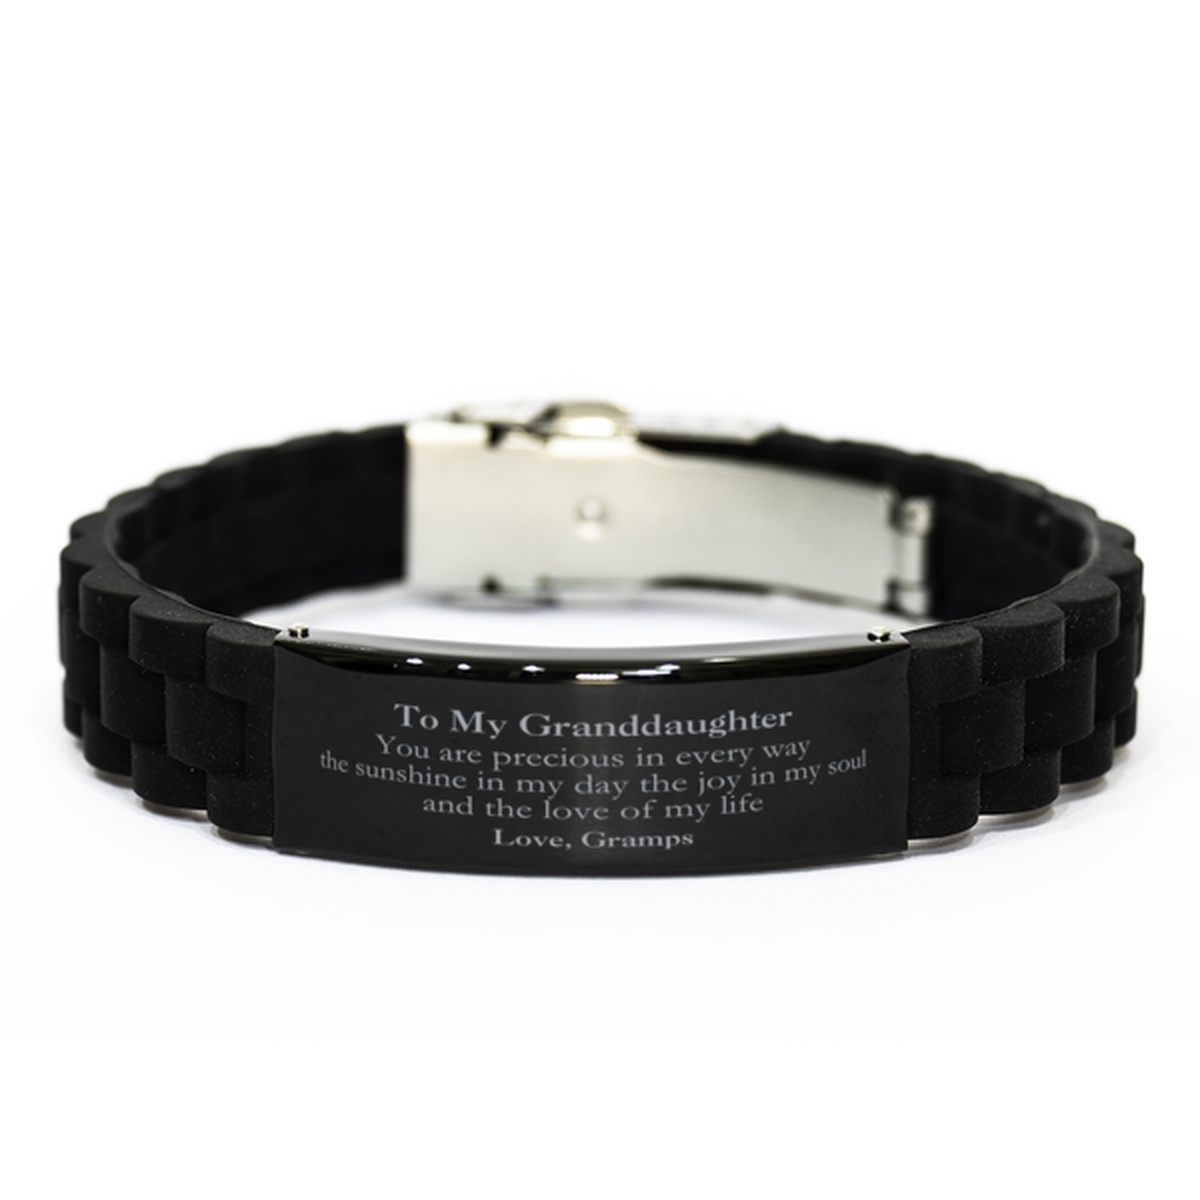 Graduation Gifts for Granddaughter Black Glidelock Clasp Bracelet Present from Gramps, Christmas Granddaughter Birthday Gifts Granddaughter You are precious in every way the sunshine in my day. Love, Gramps